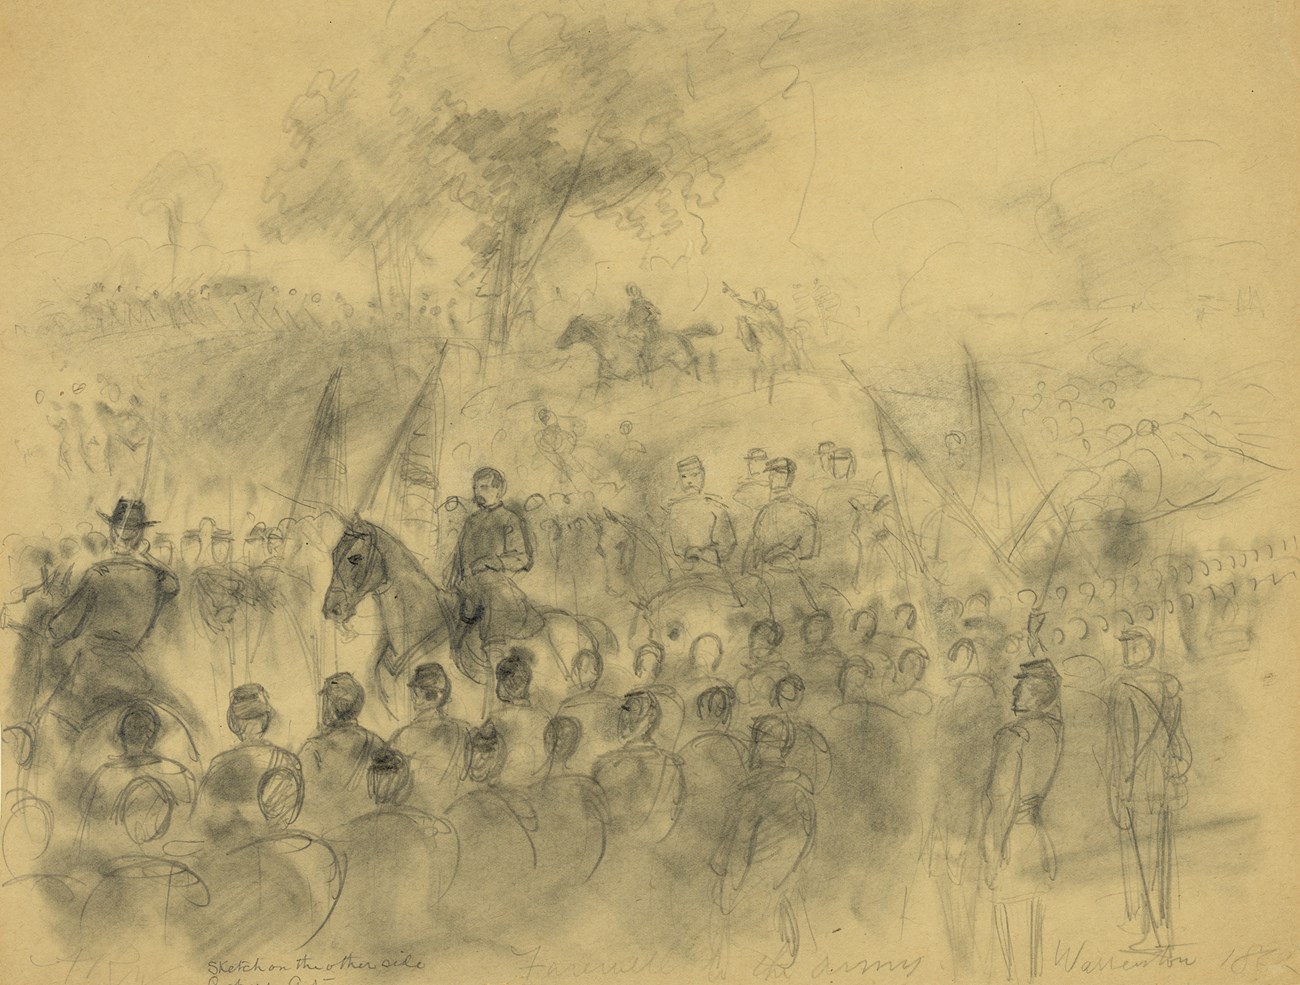 A pencil sketch of a man on horseback riding through a group of soldiers.